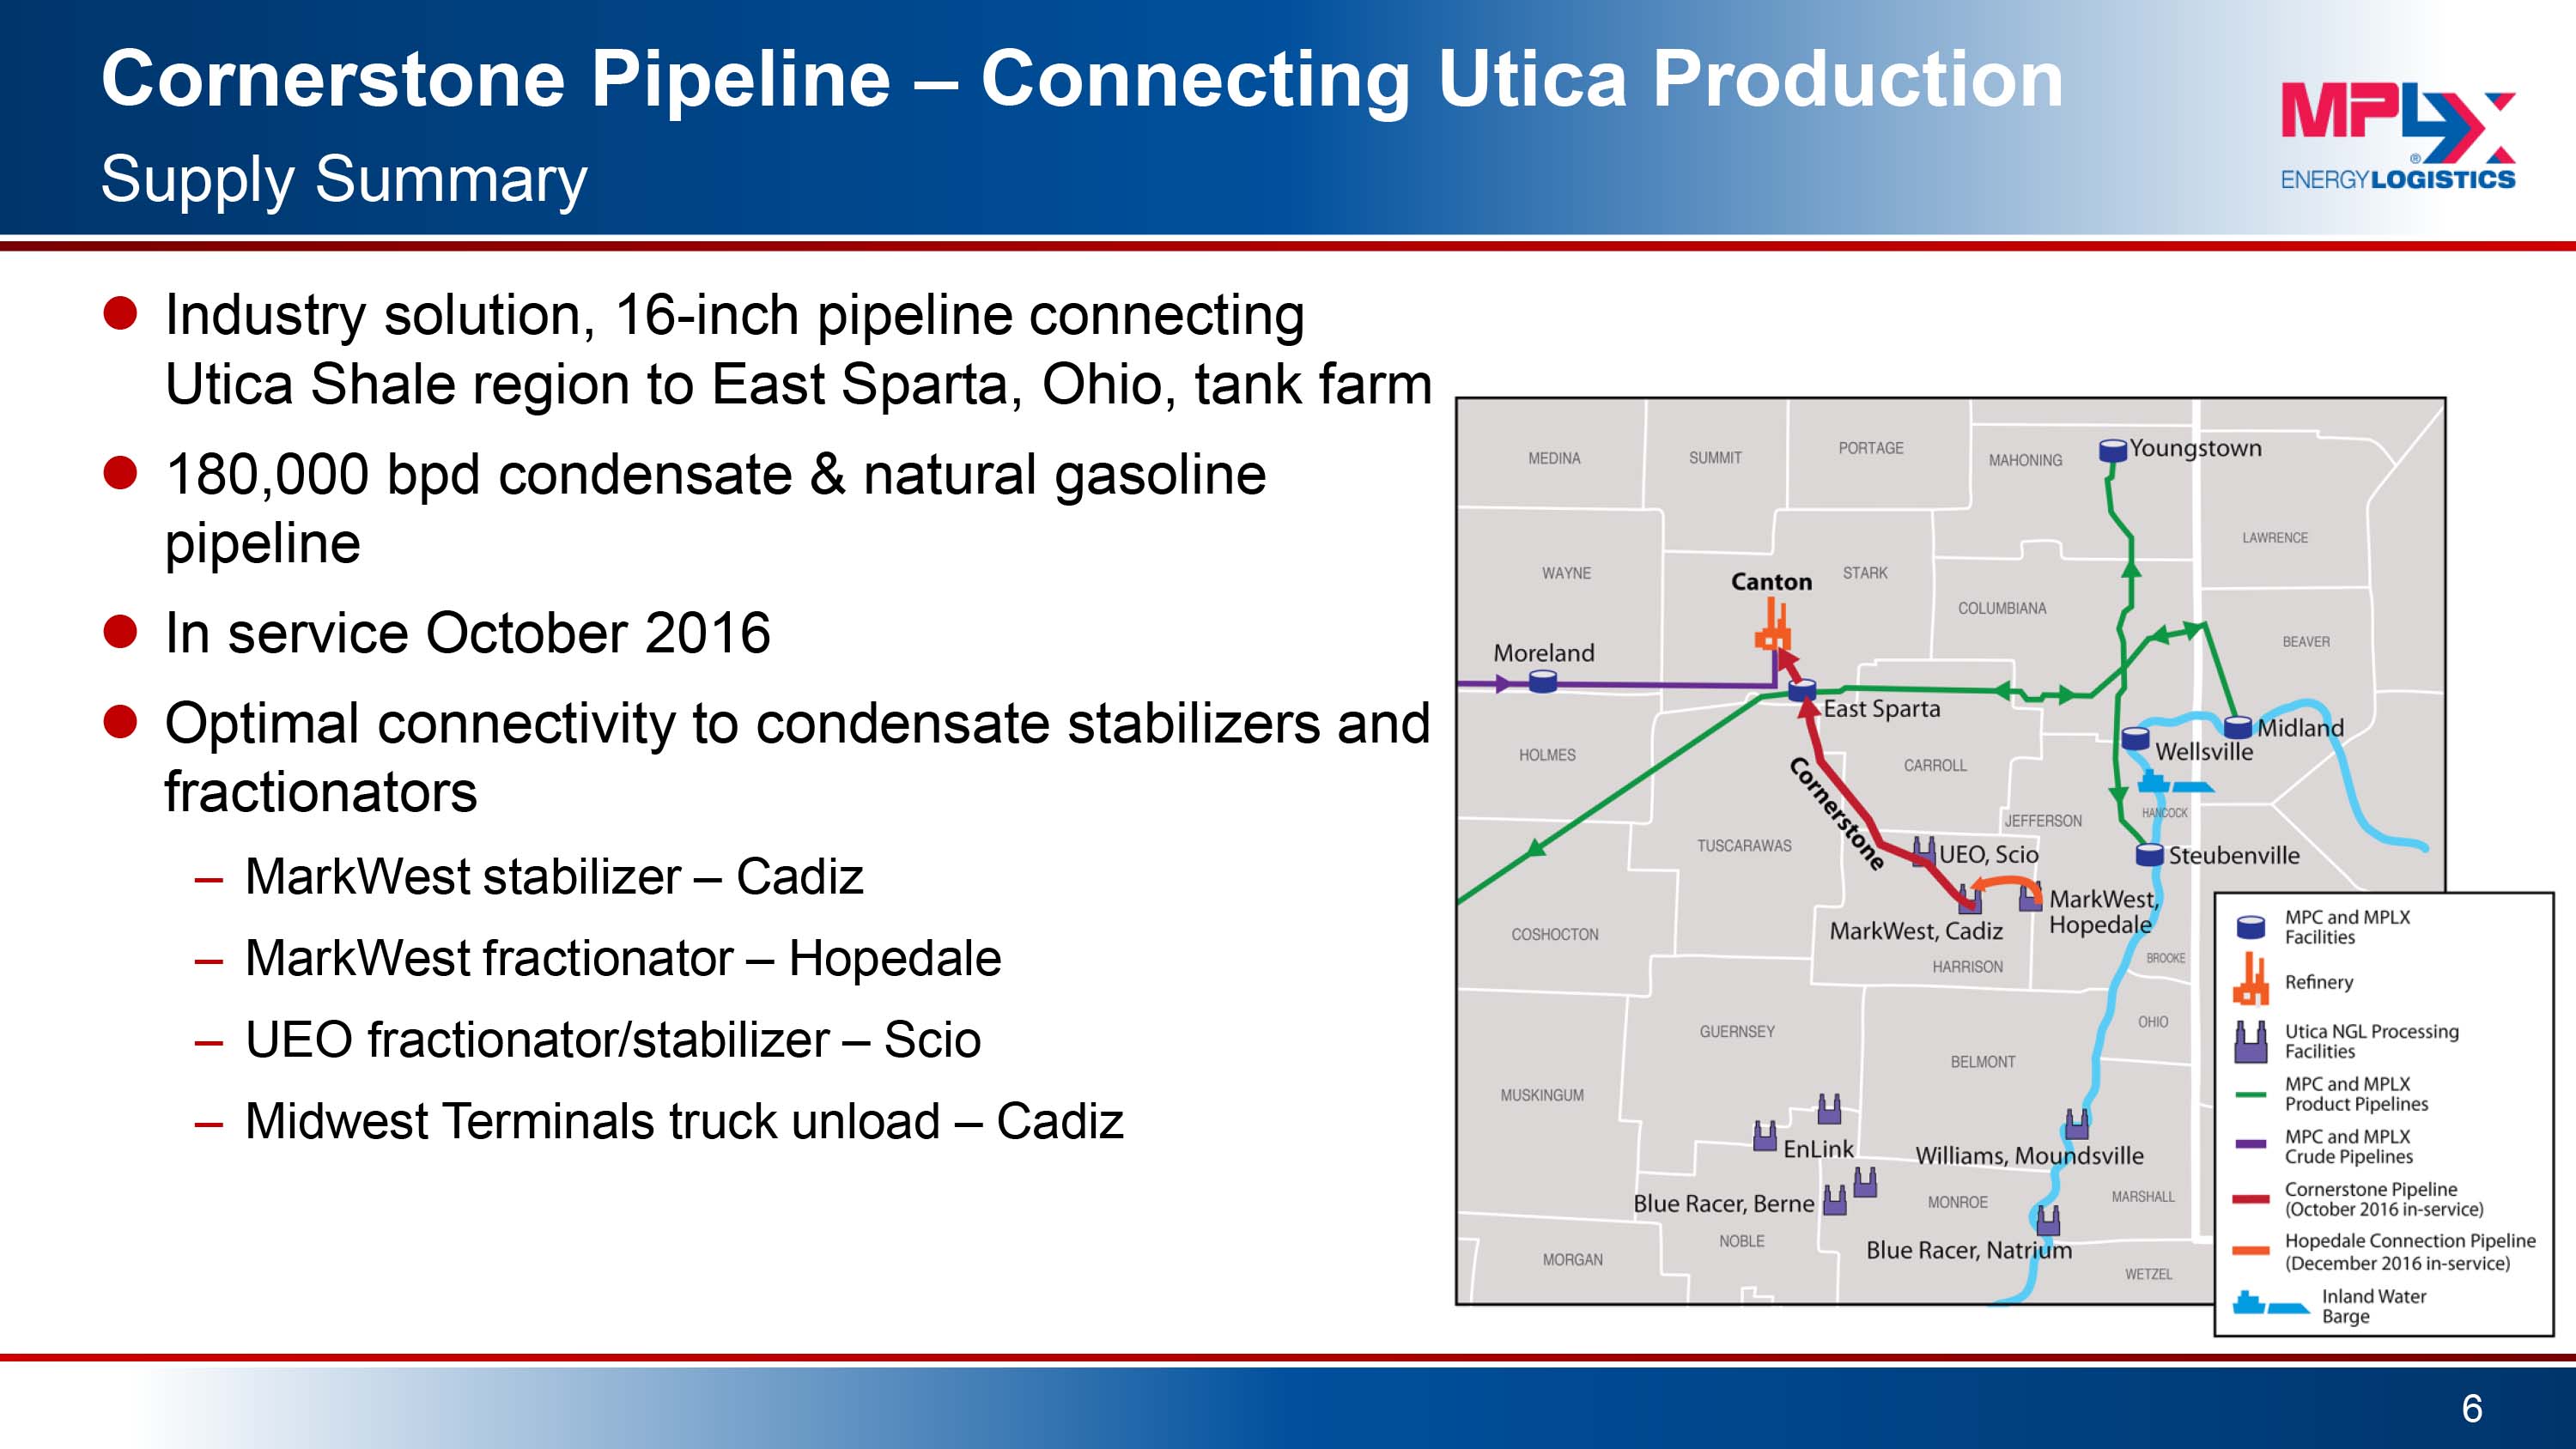 Its Cornerstone Pipeline is the backbone of the system MPLX is building in the Appalachian region. Source: MPLX, presented at Hart Energy's 2018 Marcellus-Utica Midstream Conference